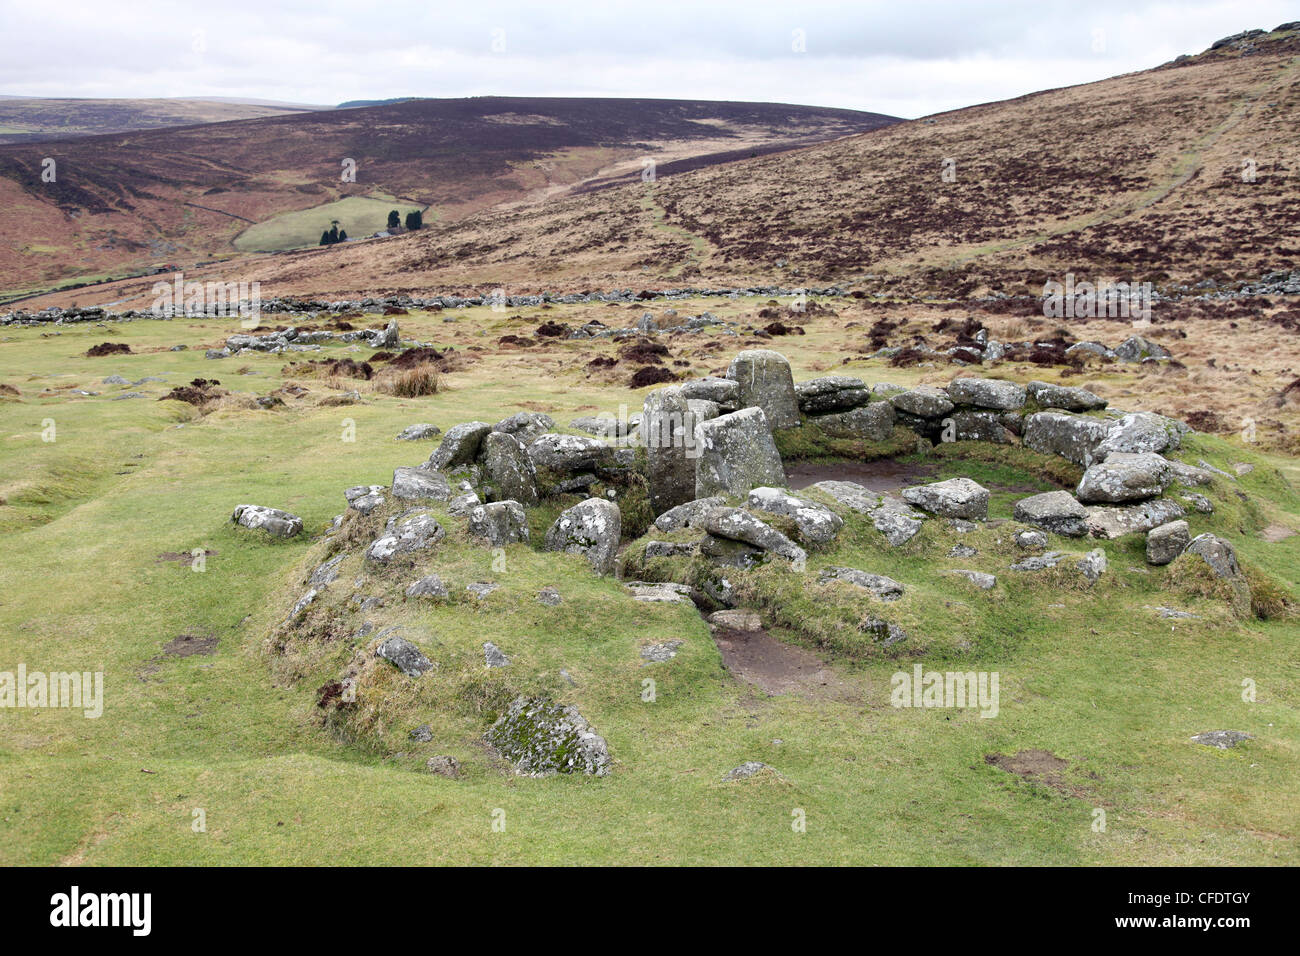 Ruins of a middle Bronze Age house, 3500 years old, at Grimspound, Dartmoor, Devon, England, United Kingdom, Europe Stock Photo